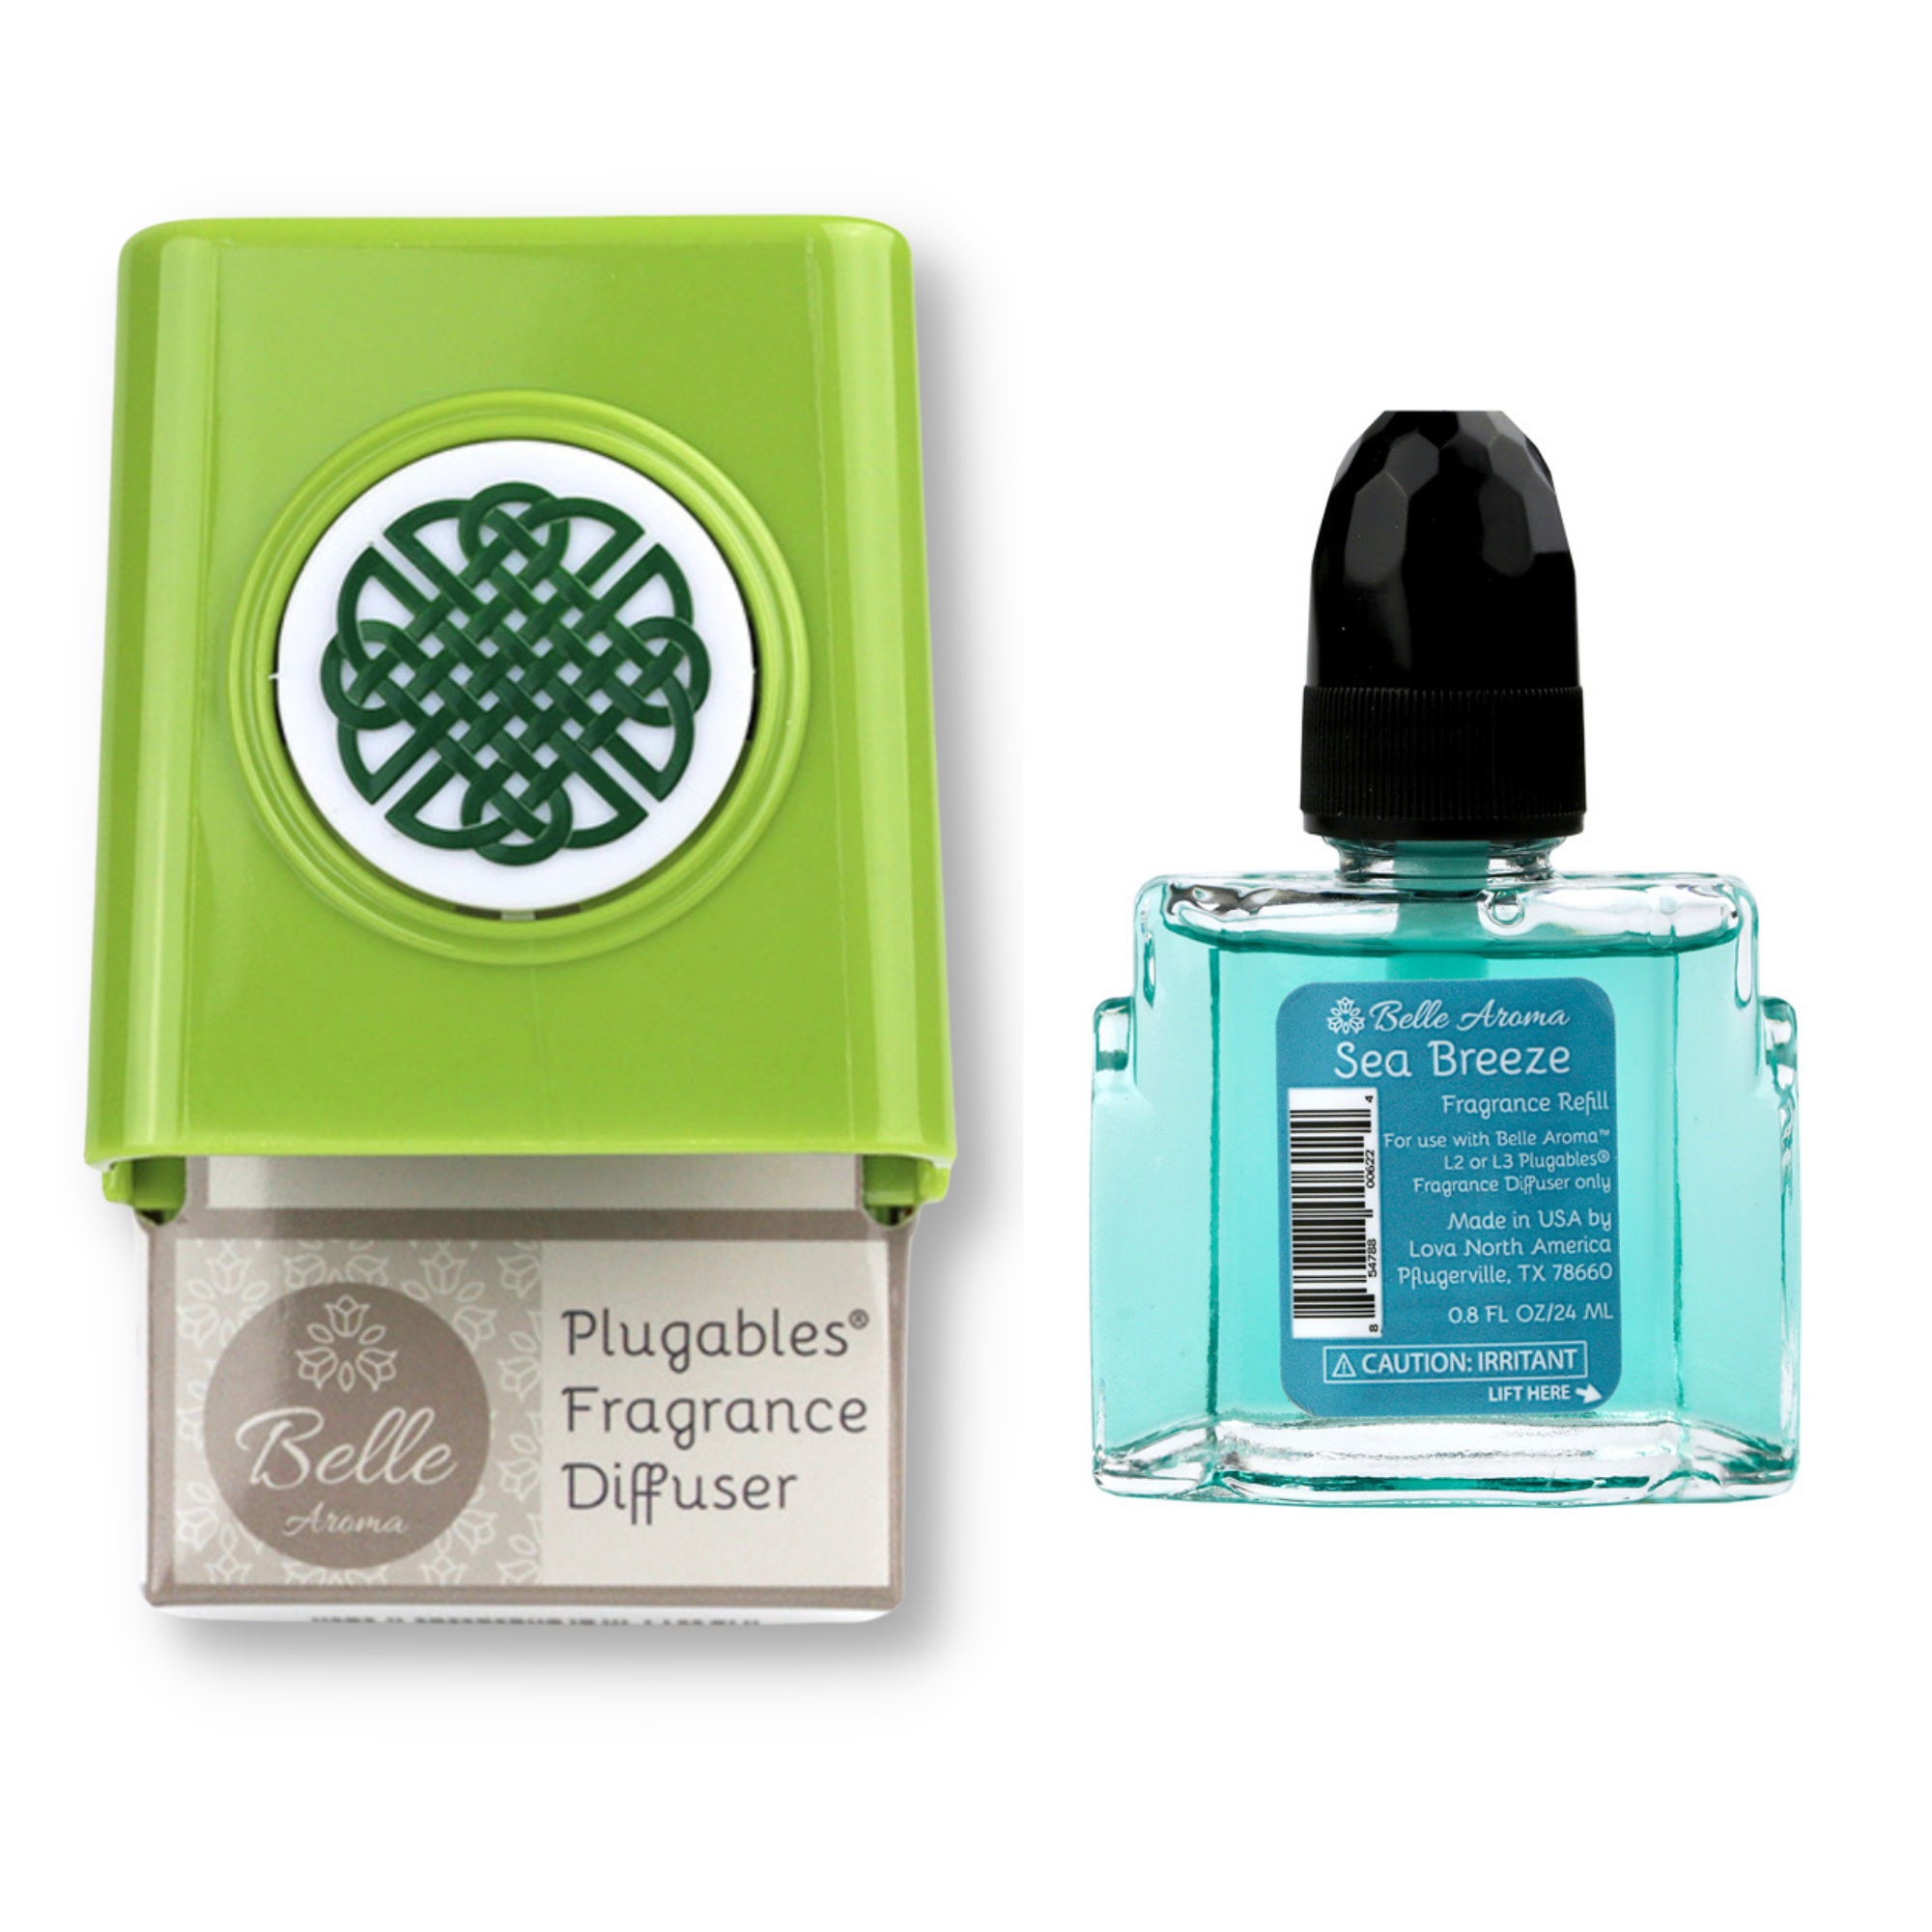 Celtic Knot Medallion Plugables® Plugin Aromalectric® Scented Oil Diffuser - Granny Smith with Sea Breeze Fragrance Oil Home Fragrance Accessories